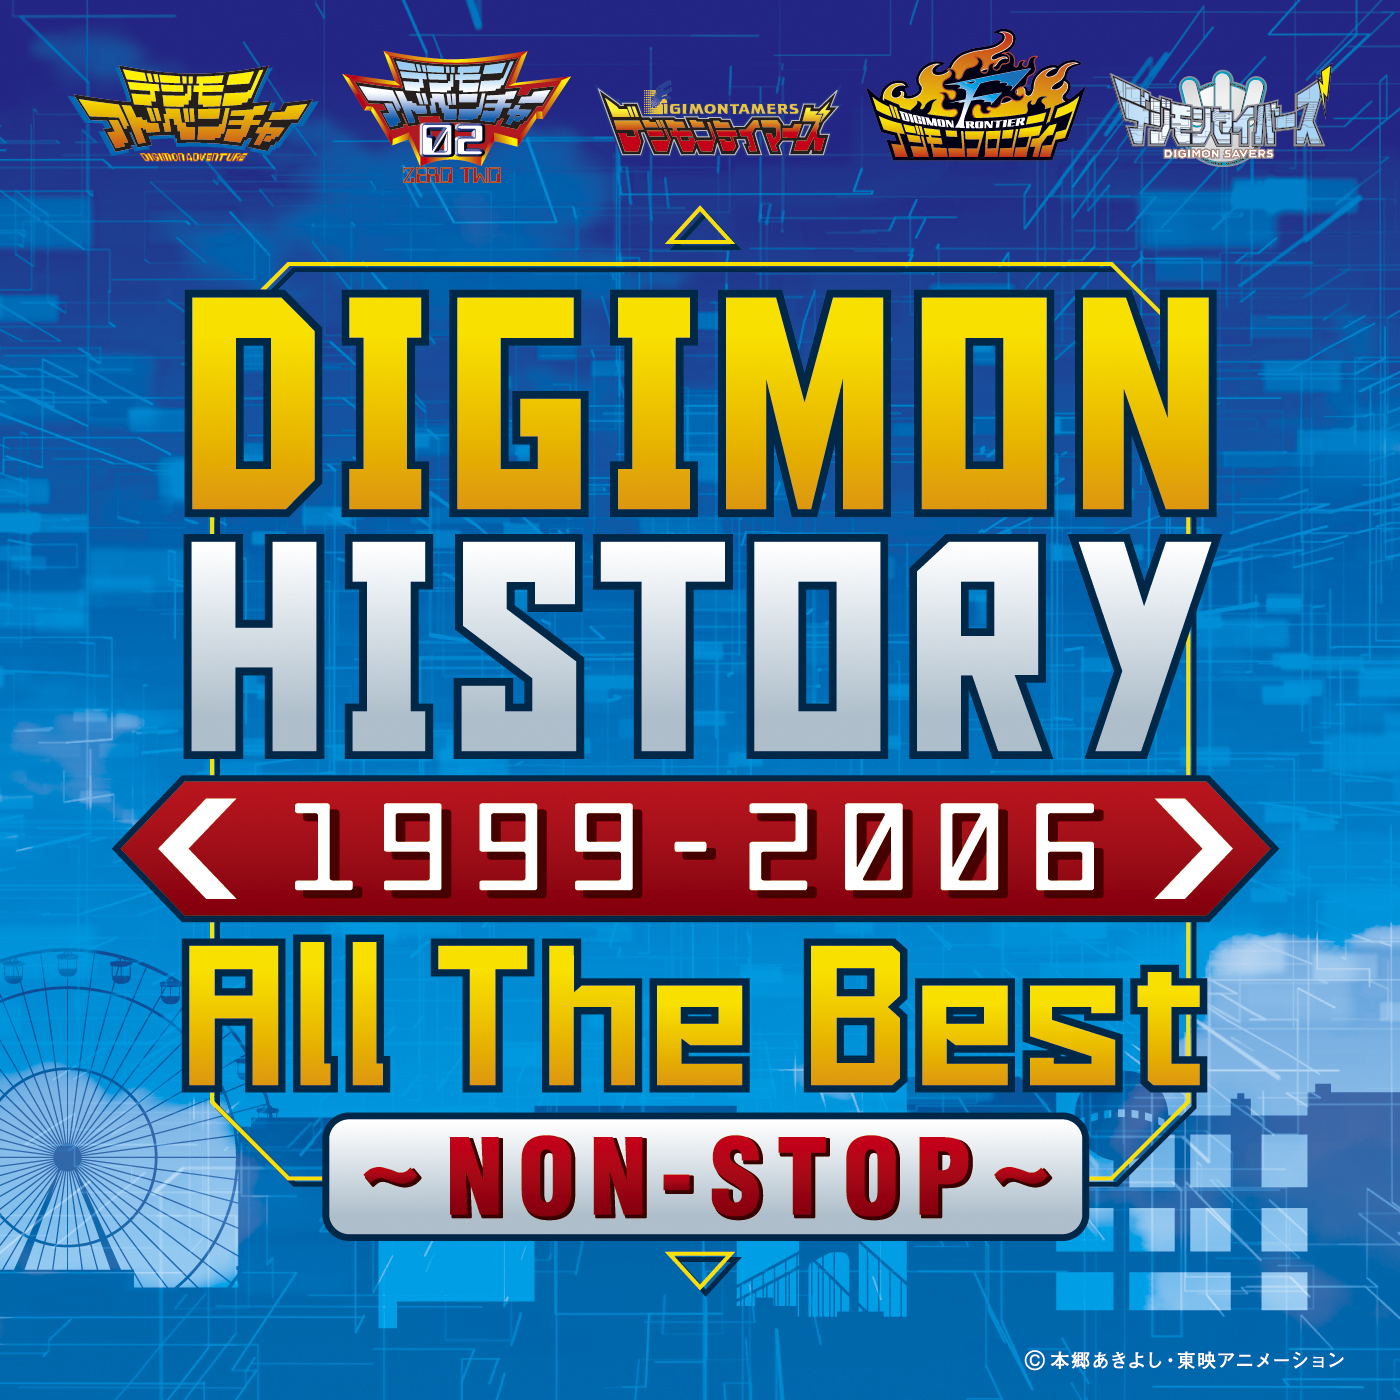 「DIGIMON HISTORY 1999-2006 All The Best～NON-STOP～」